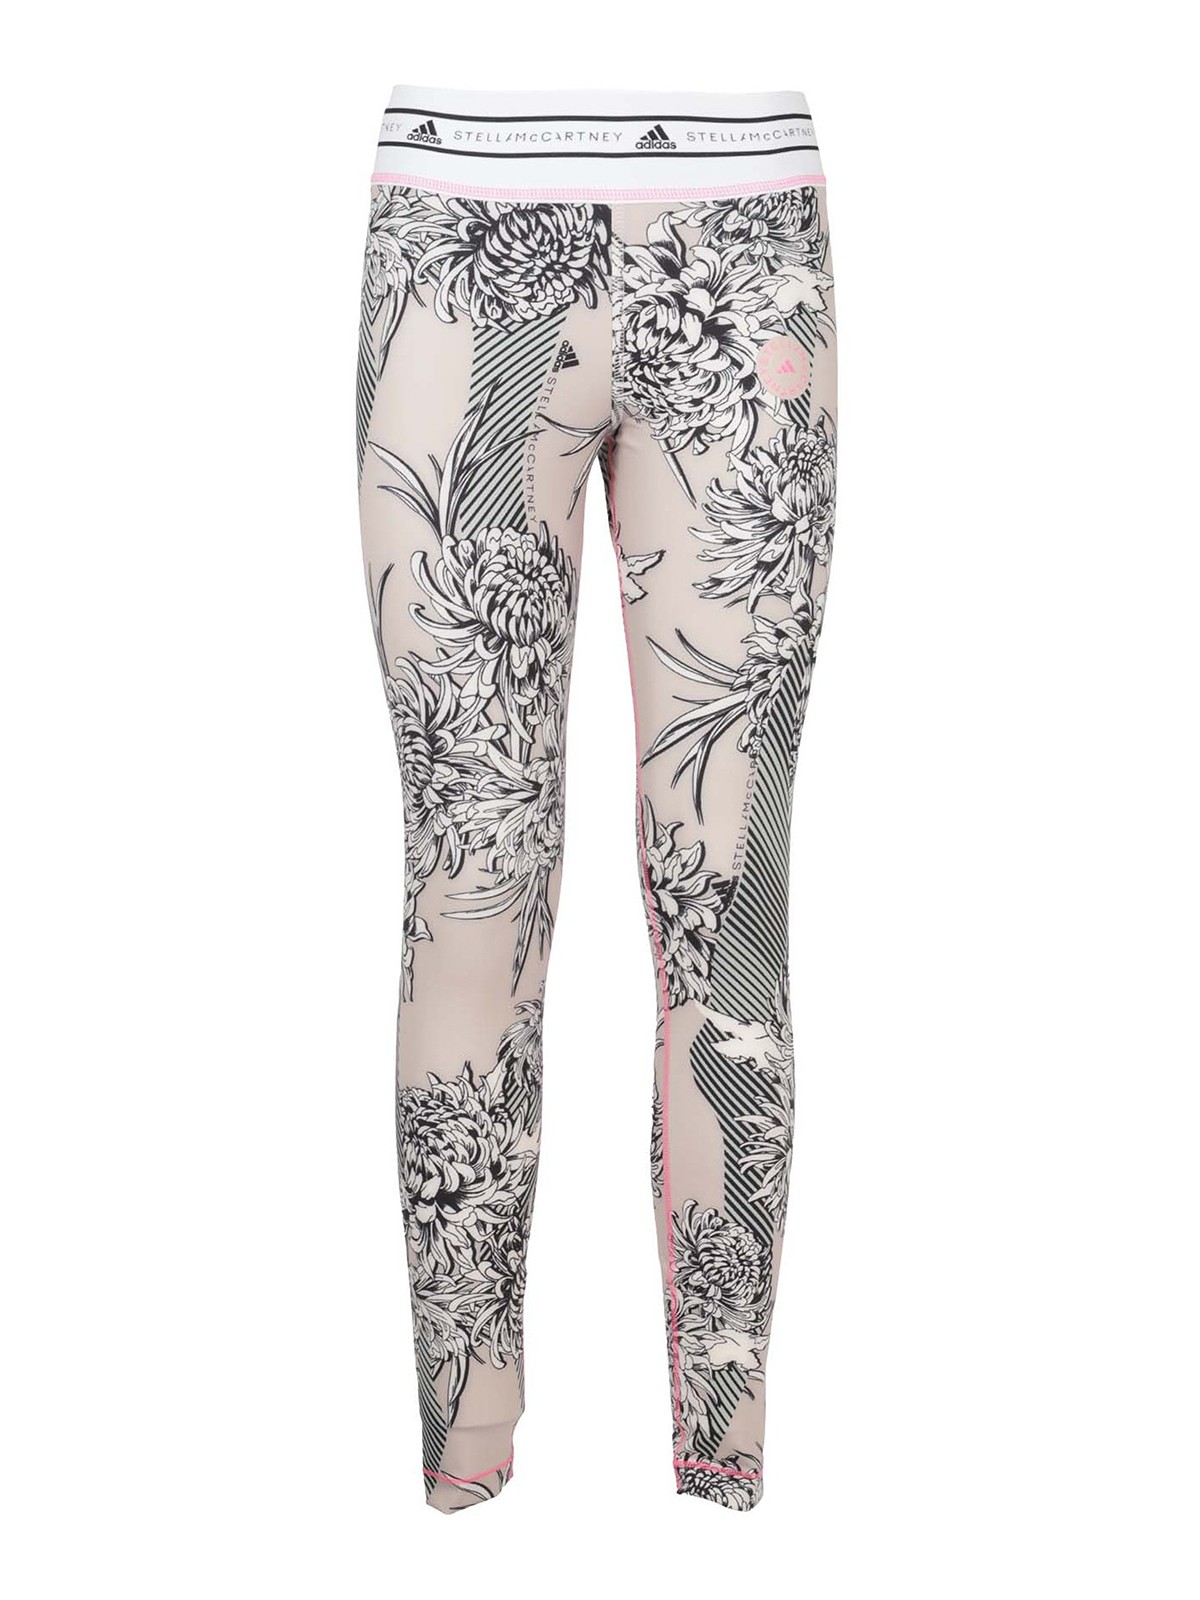 Adidas By Stella Mccartney Floral Patterned Leggings In Light Pink